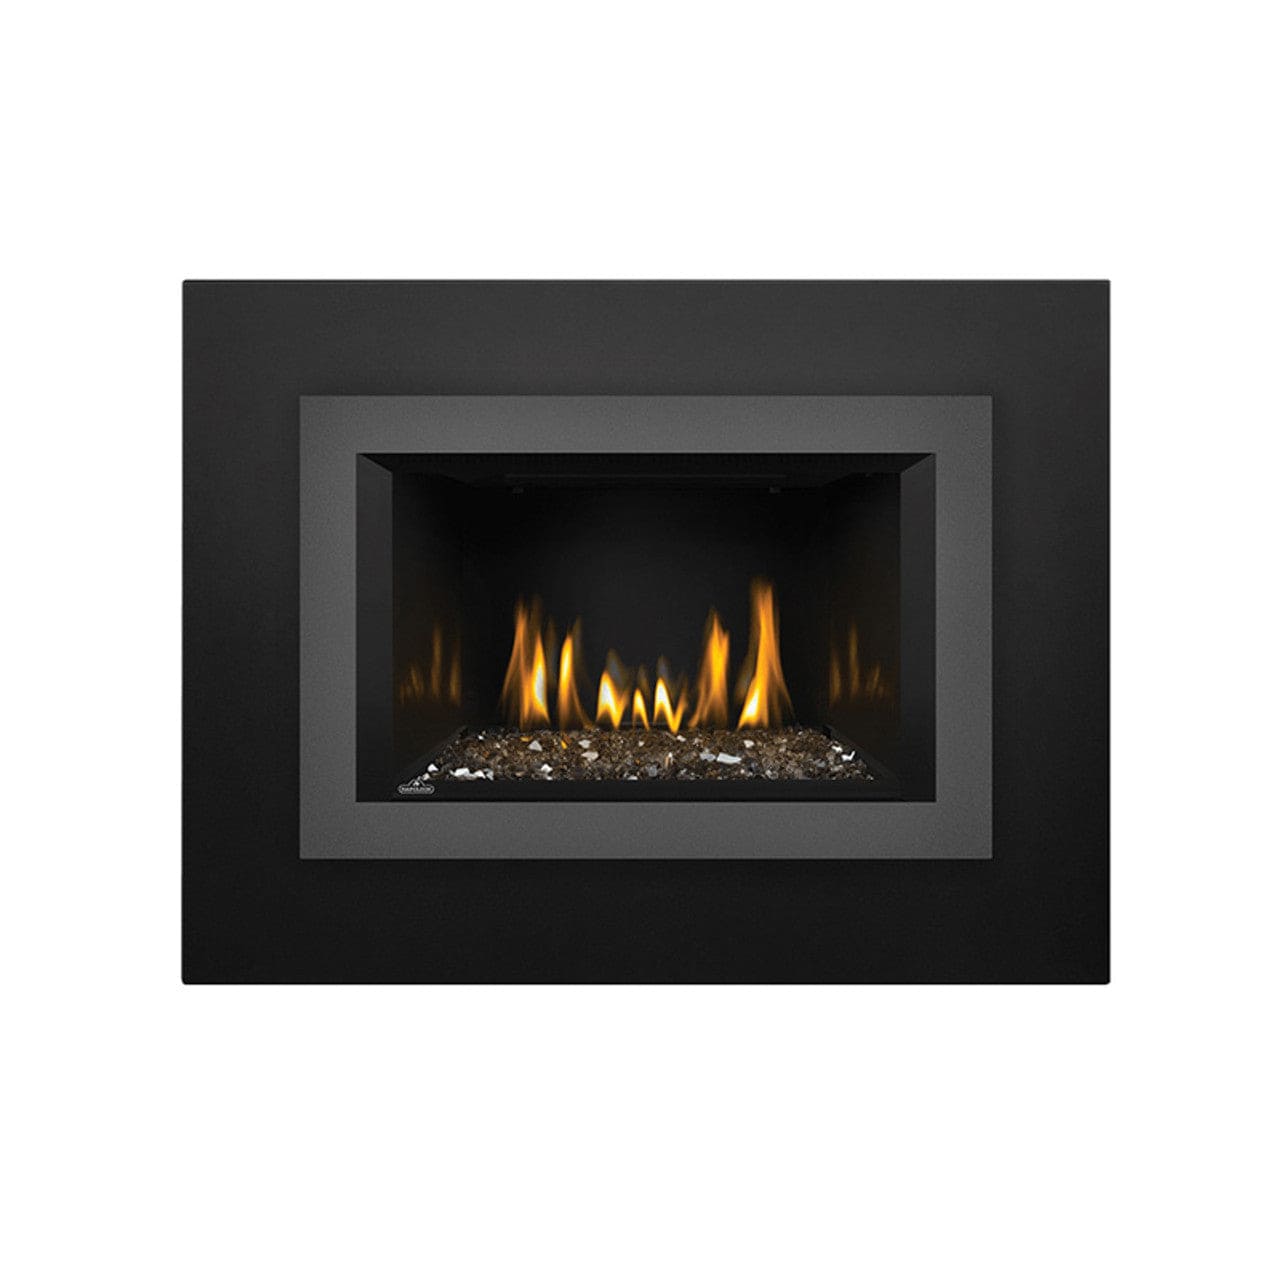 Napoleon OAKVILLE 3 GLASS Direct Vent Electronic Ignition Natural Gas Fireplace Insert - GDIG3N - Chimney Cricket